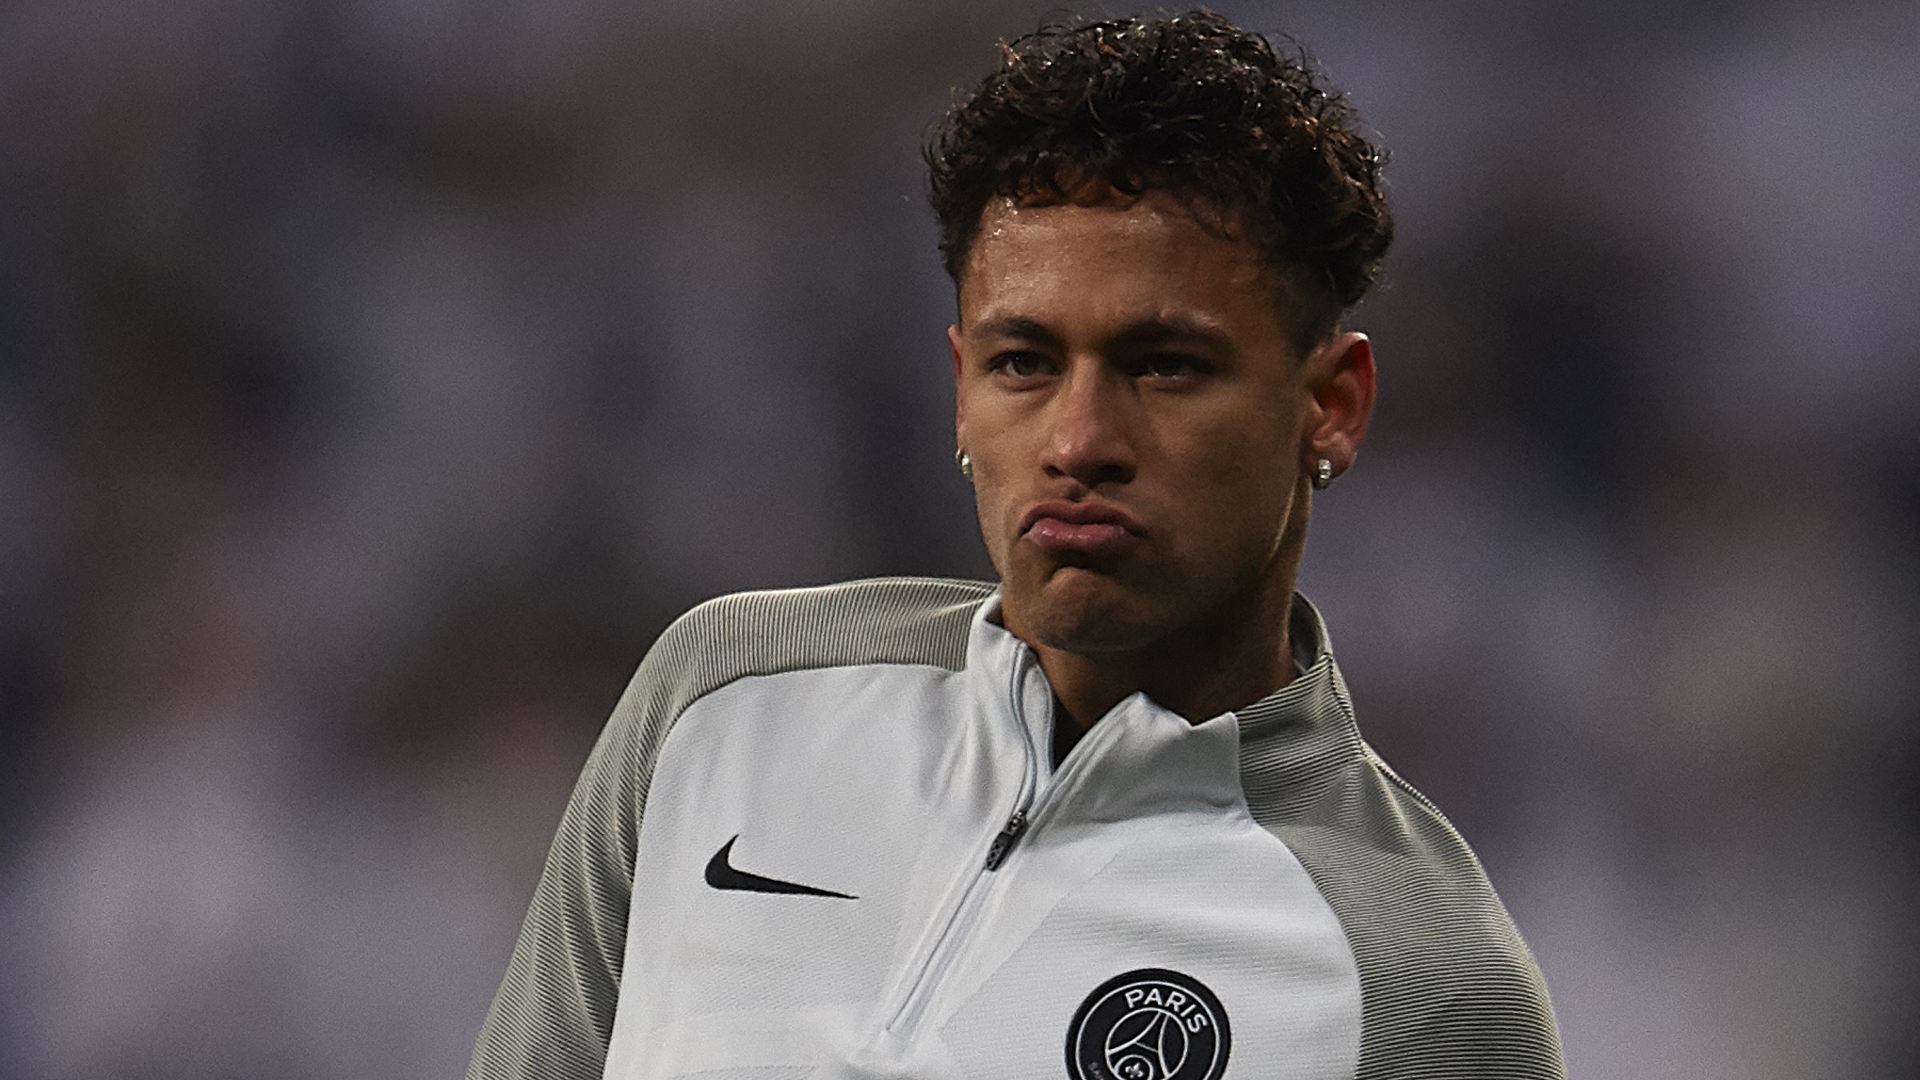 Transfer news & rumours LIVE FFP could force PSG to let Neymar leave